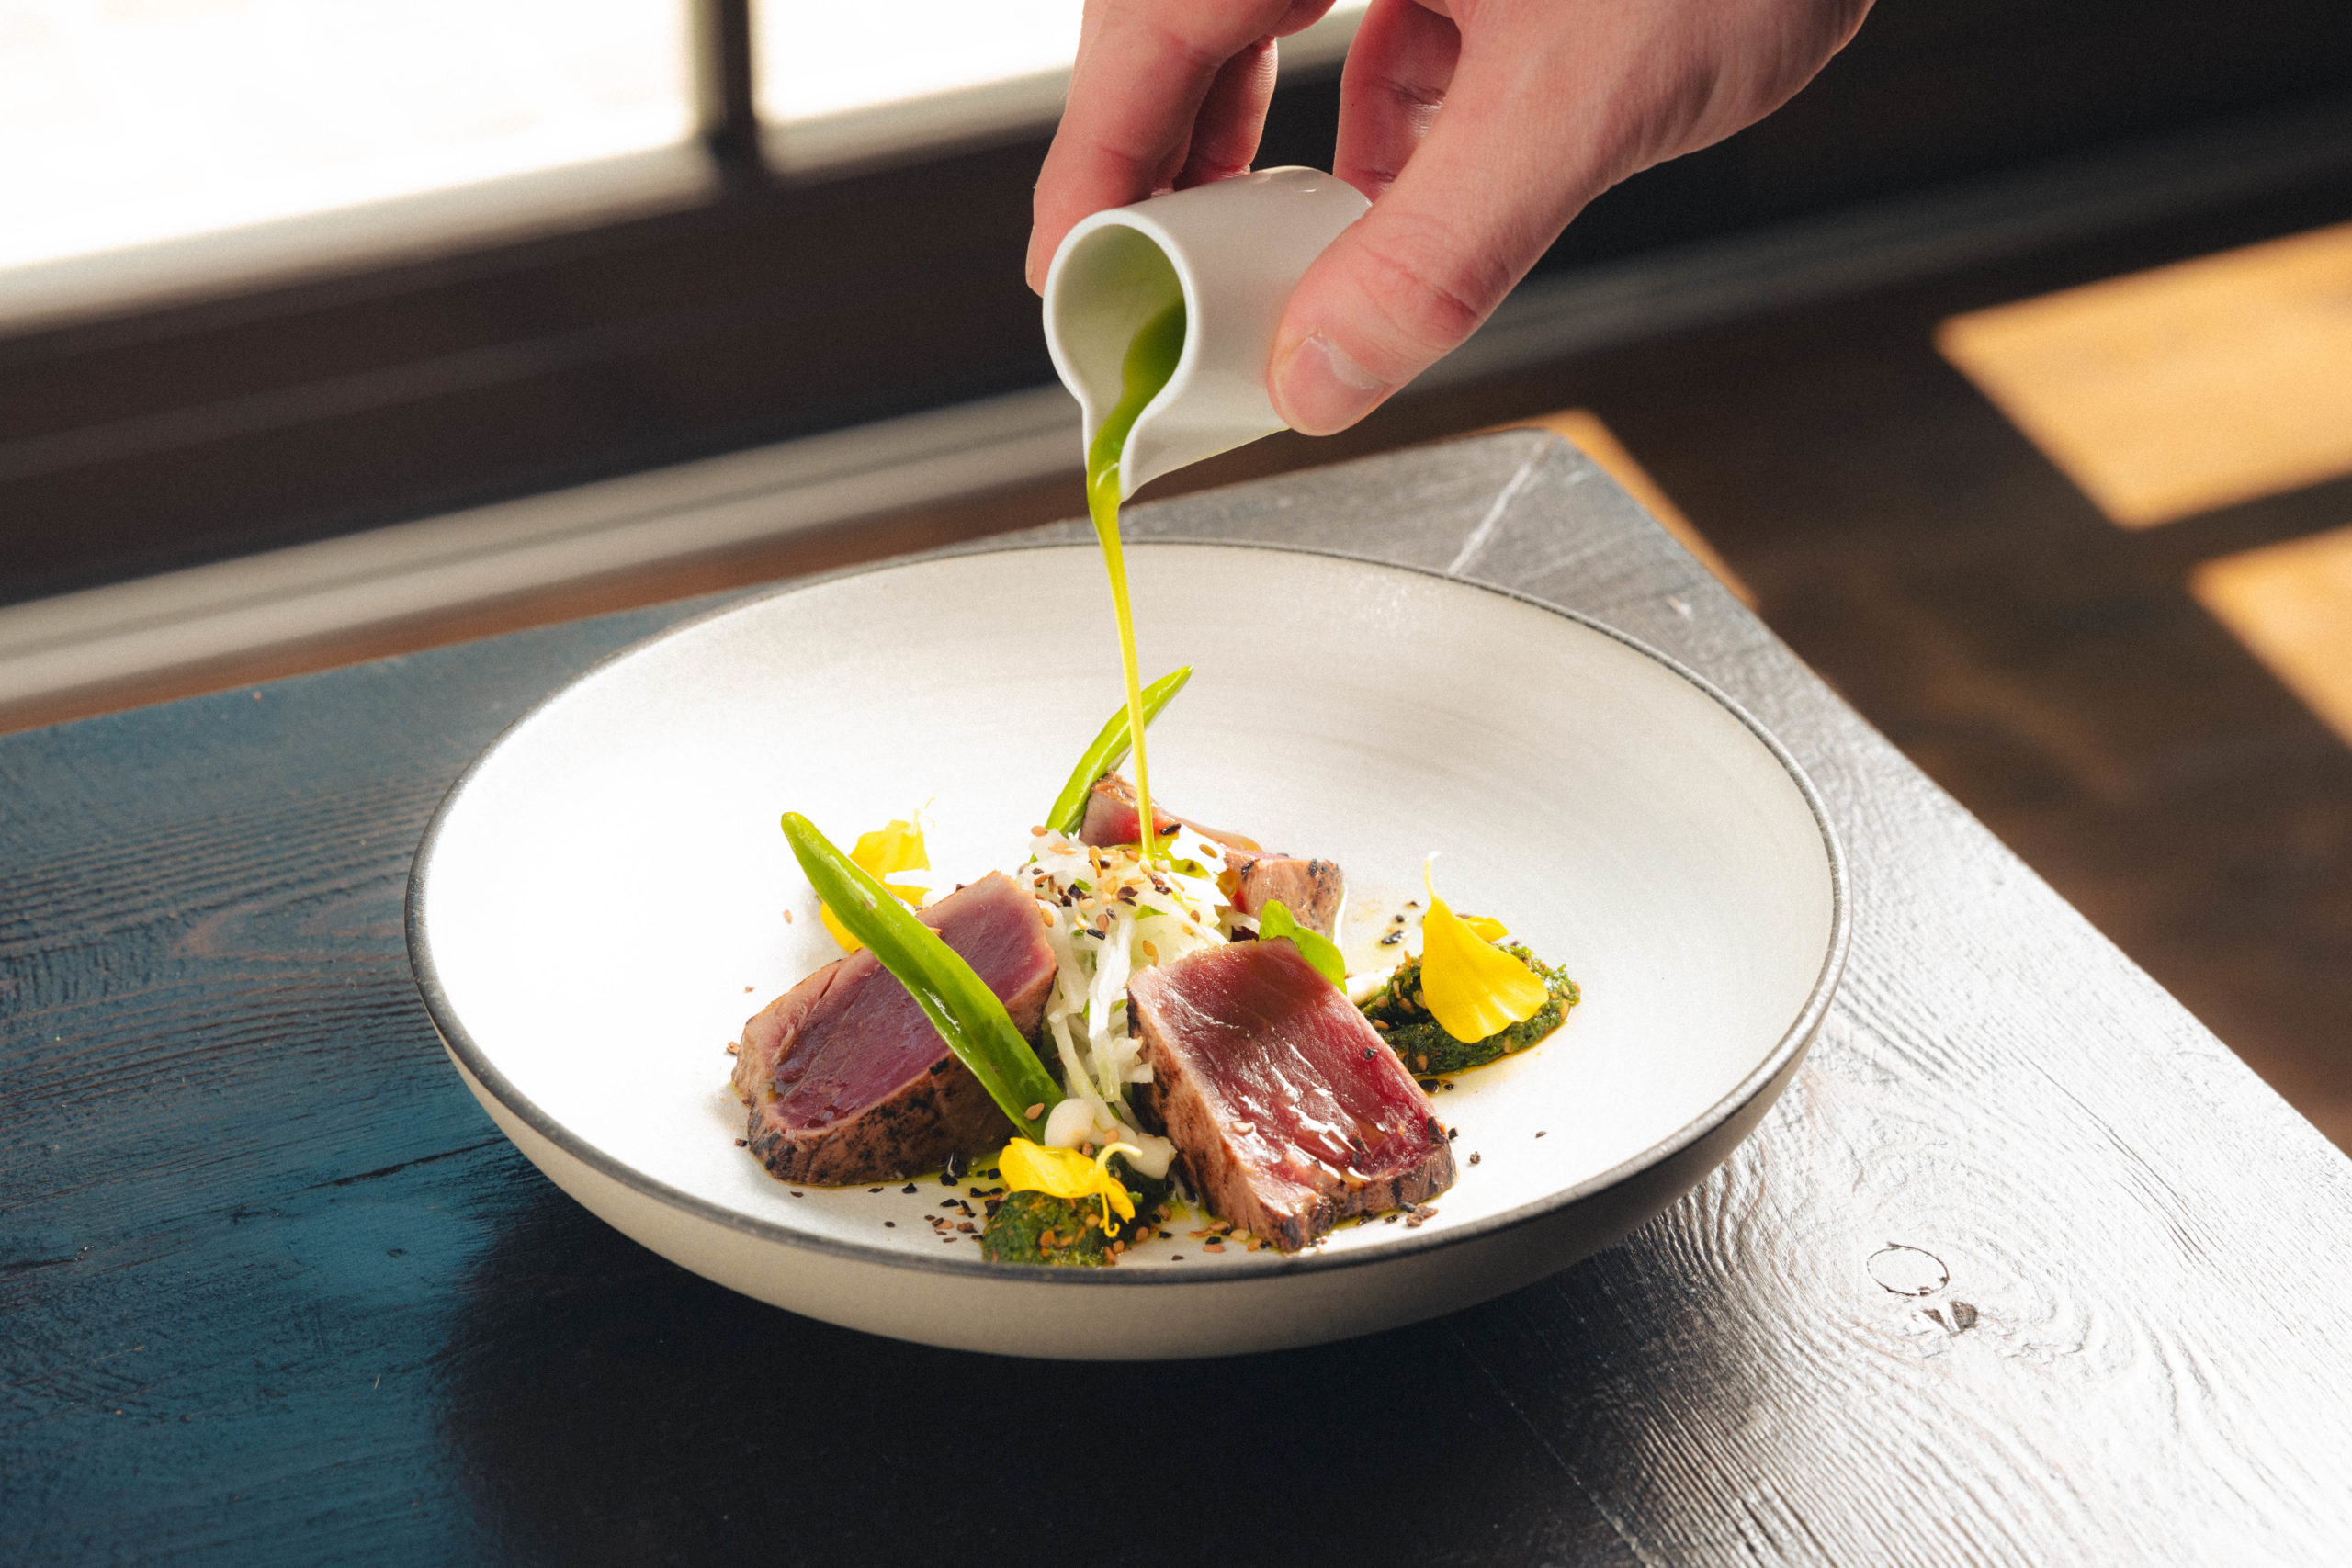 On the menu of the Restaurant Amitié, you will find a delicious tuna tataki with daikon radish, Jalapeño peppers and a Miso mayonnaise.